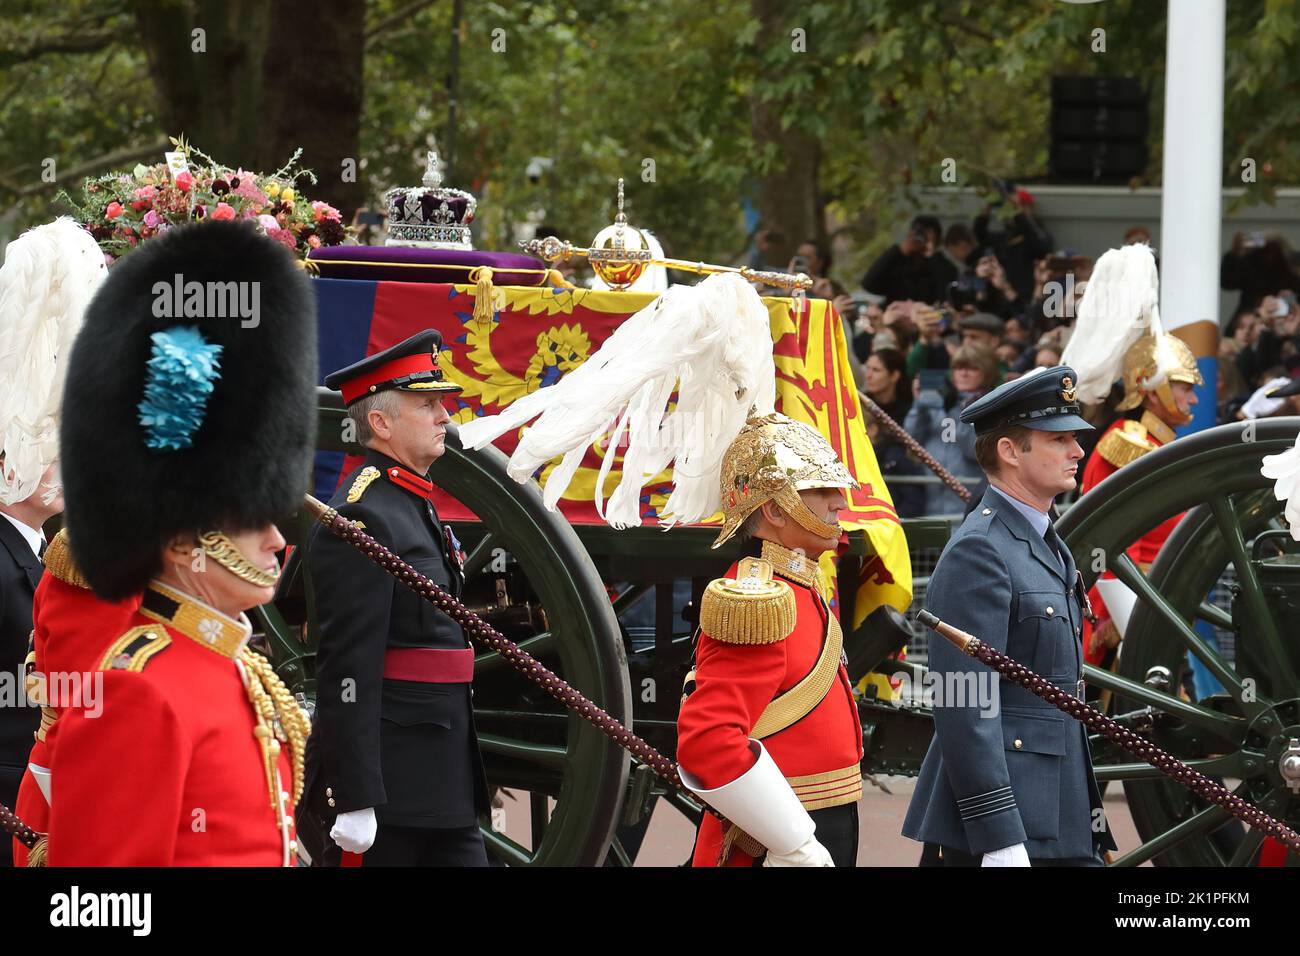 The coffin of Queen Elizabeth II is carried on a gun carriage pulled by Royal Navy service personnel during the funeral procession along The Mall in London, UK Stock Photo